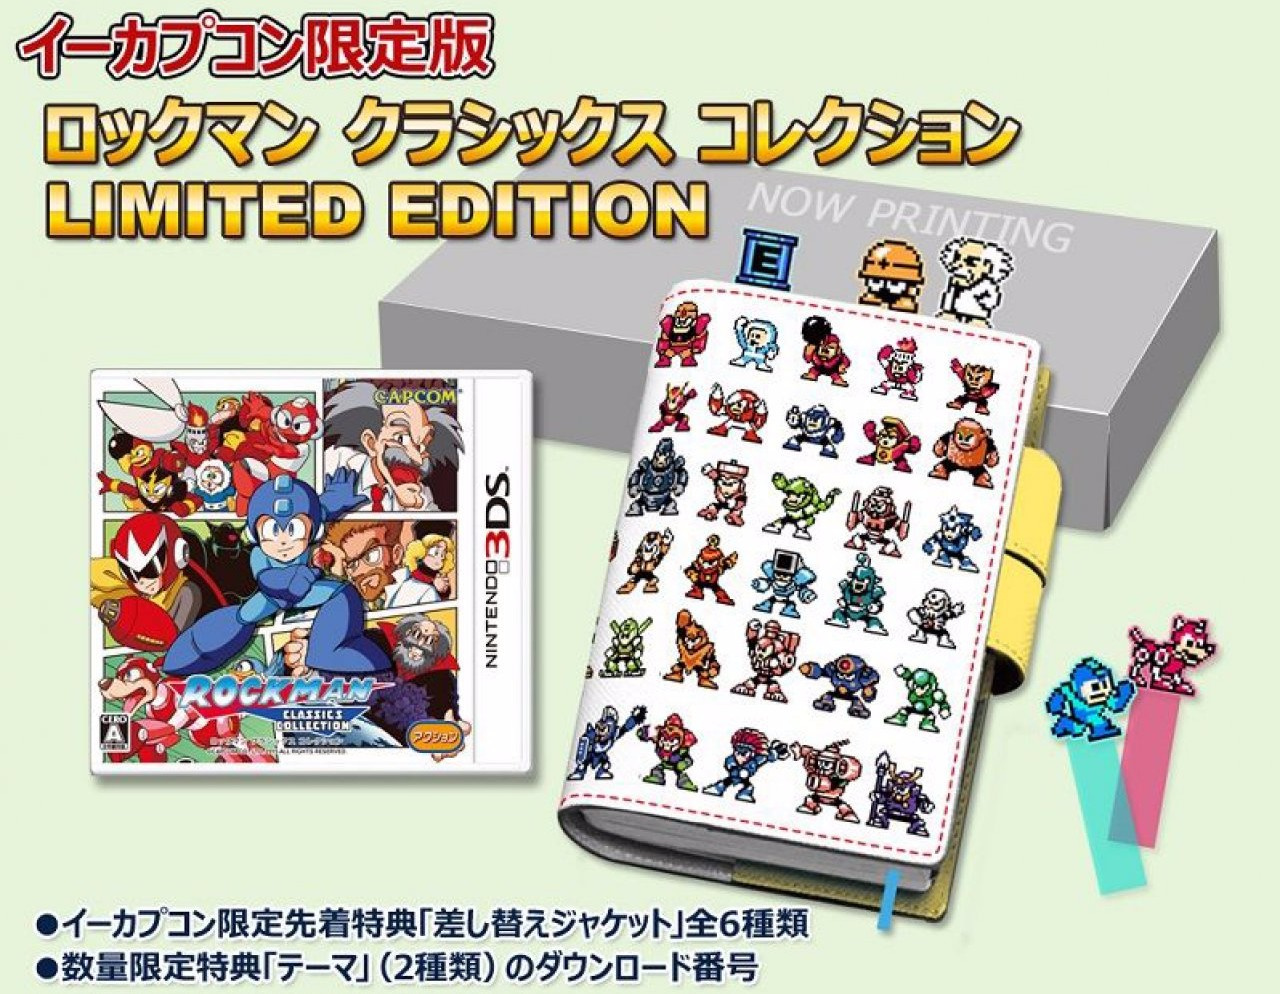 Gaze Upon The Lush Mega Man Legacy Collection Limited Edition You